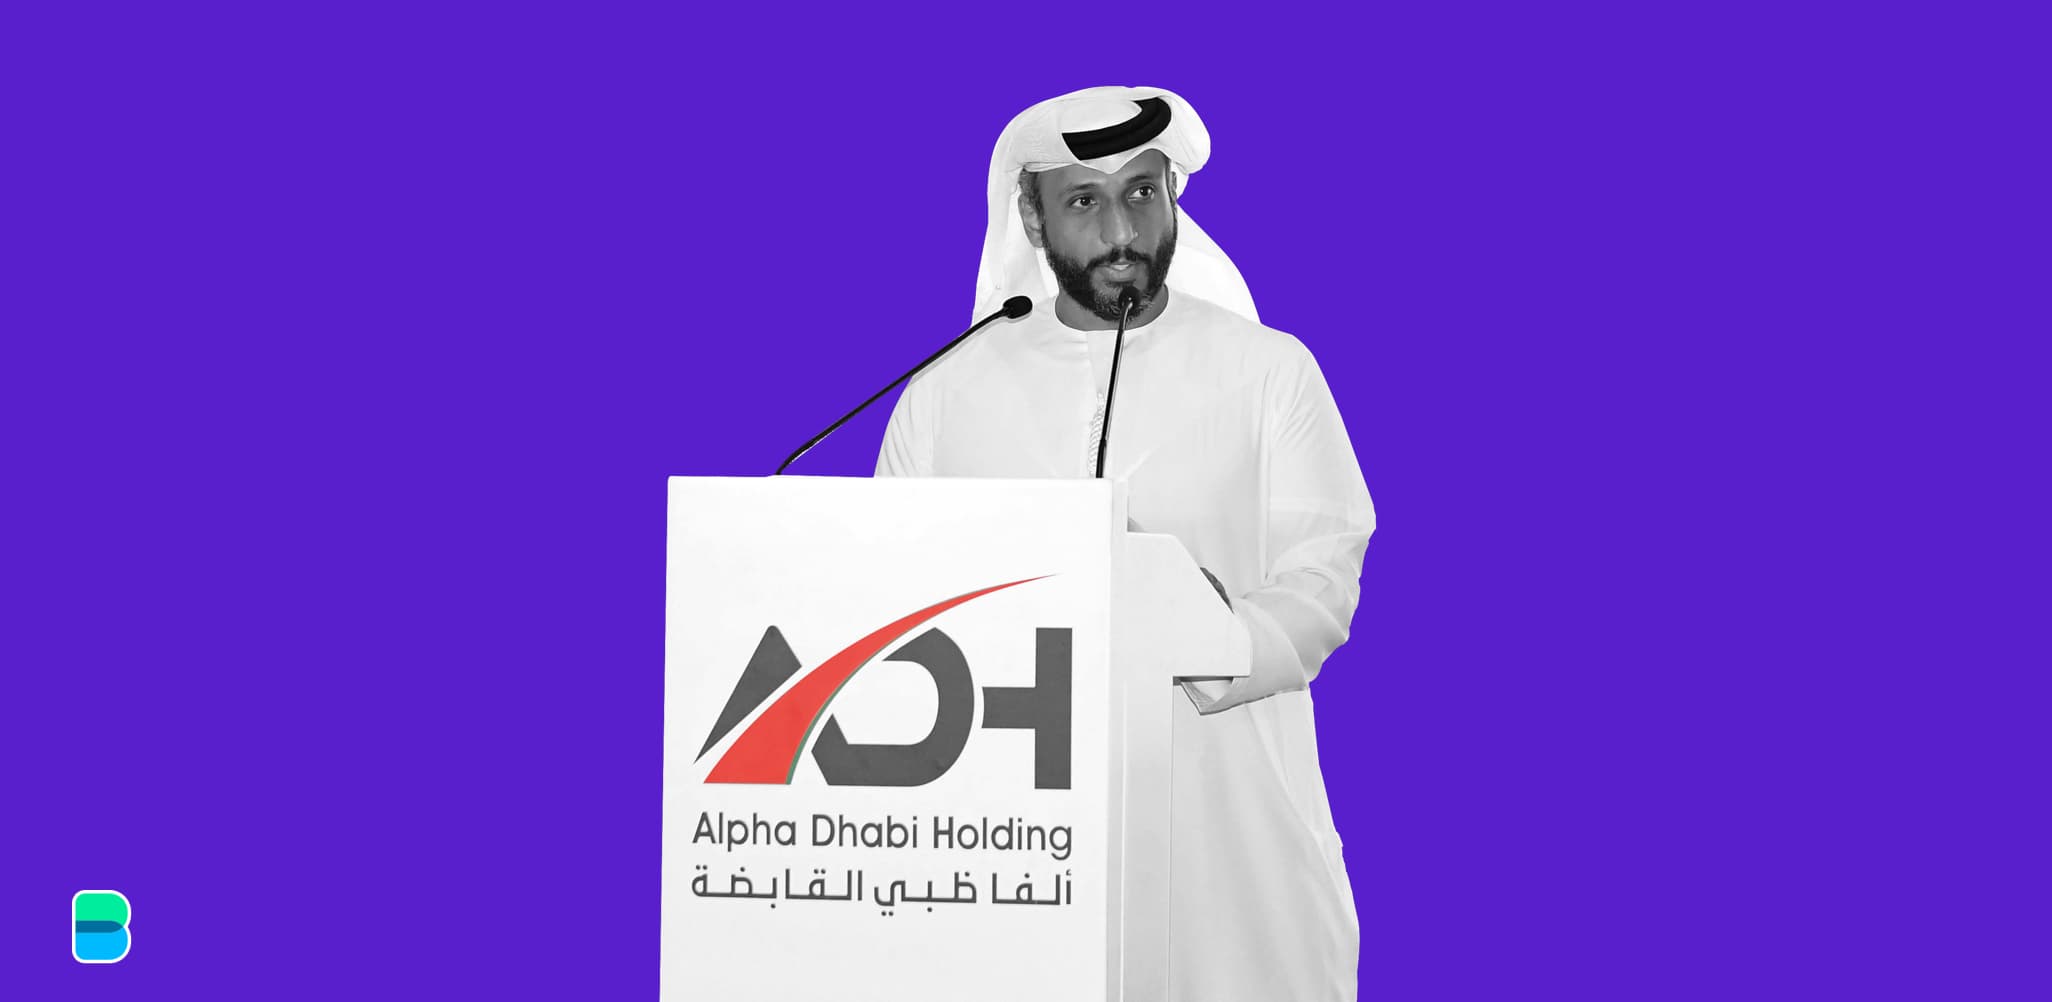 The acquisition game has gone well for Alpha Dhabi